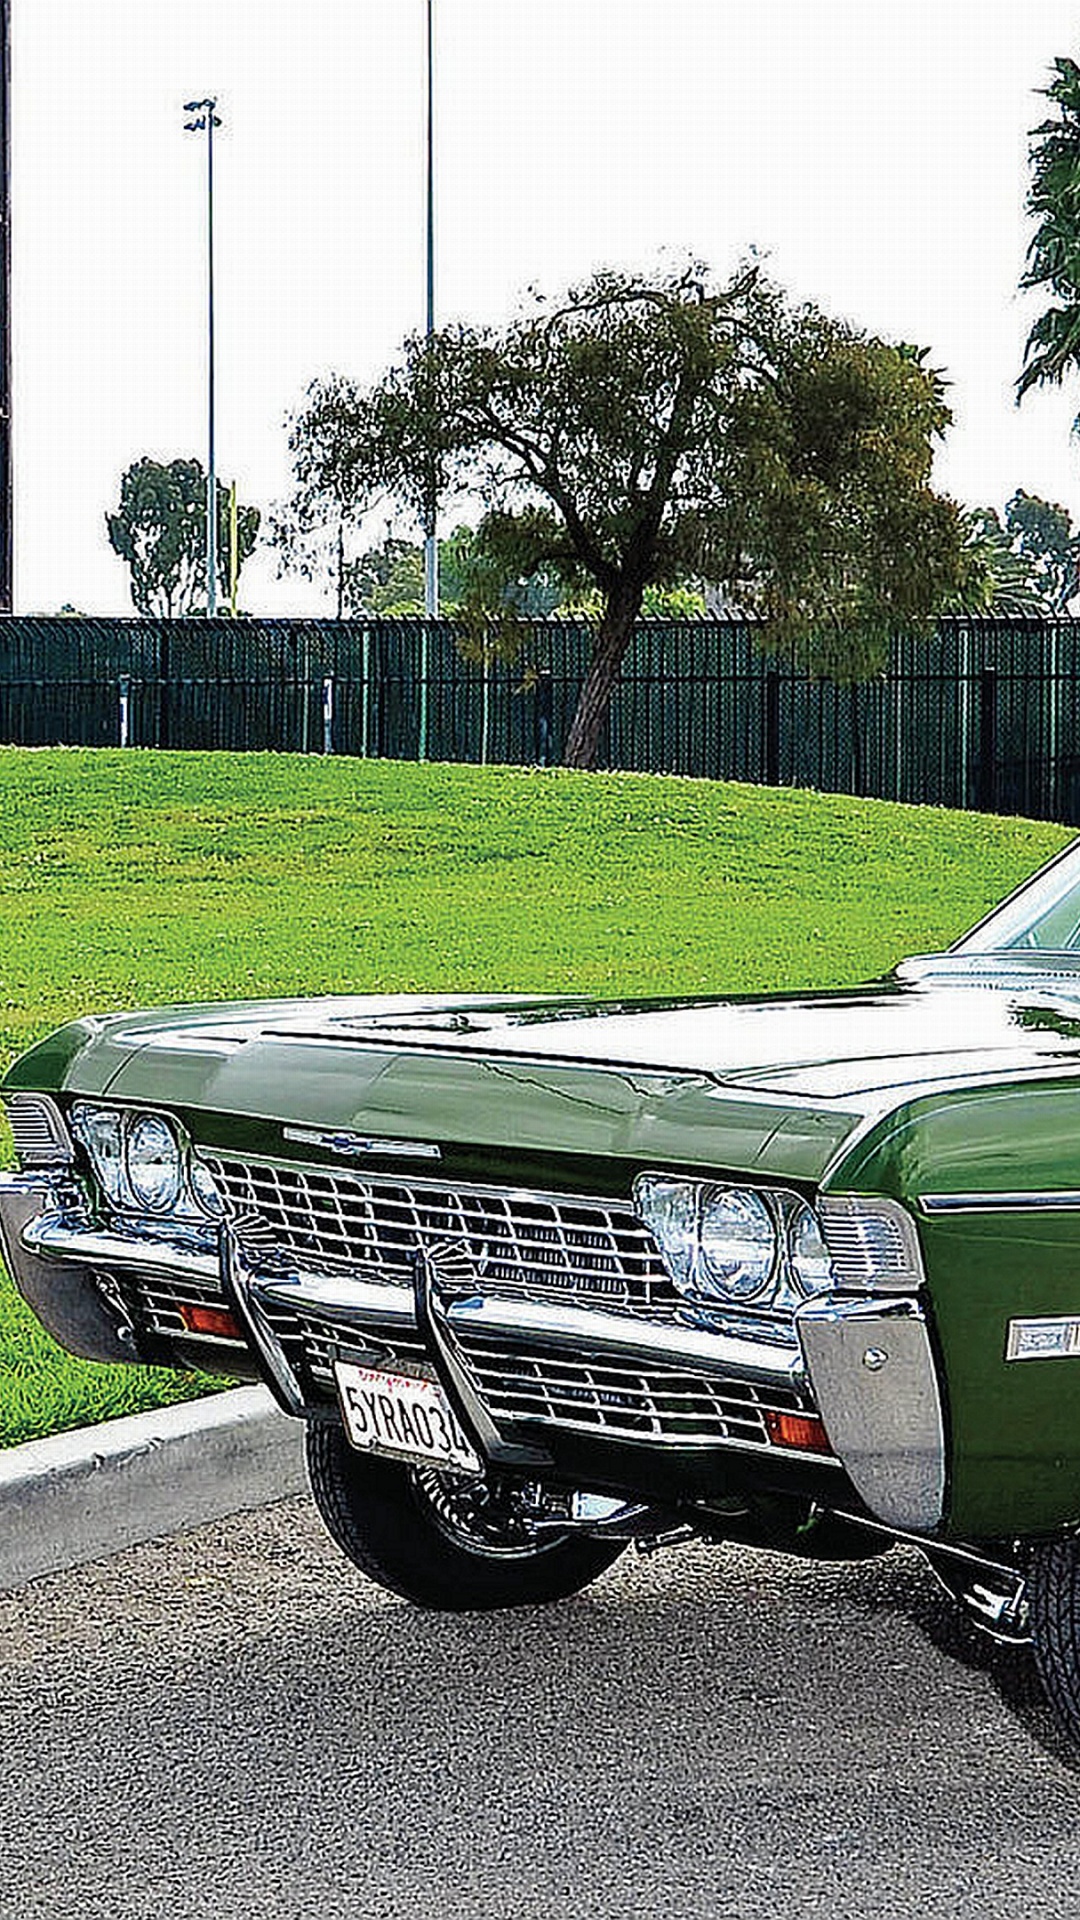 Green Classic Car Parked on Green Grass Field During Daytime. Wallpaper in 1080x1920 Resolution